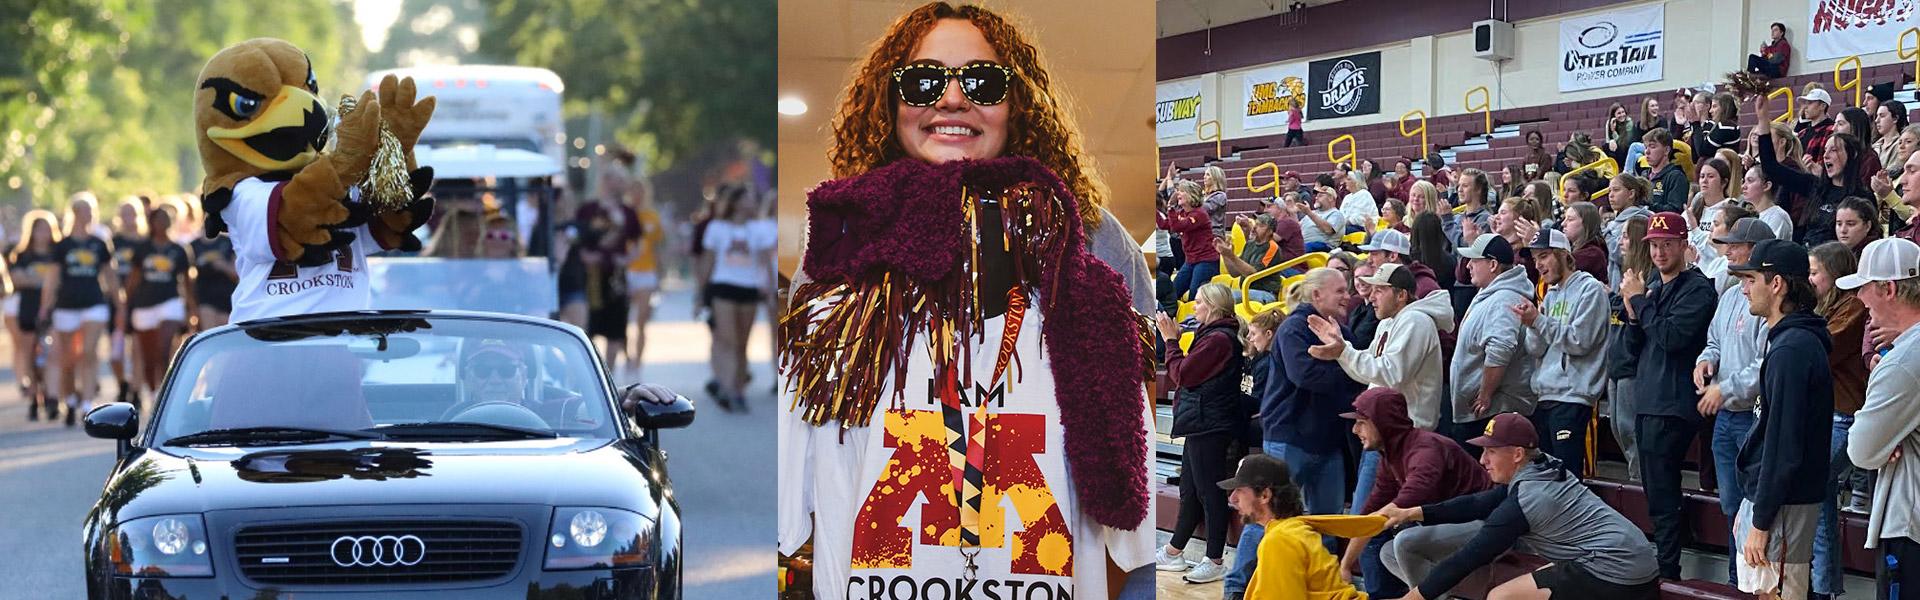 Homecoming collage - regal with athletes at the parade, Paint the Town and fans at the volleyball game